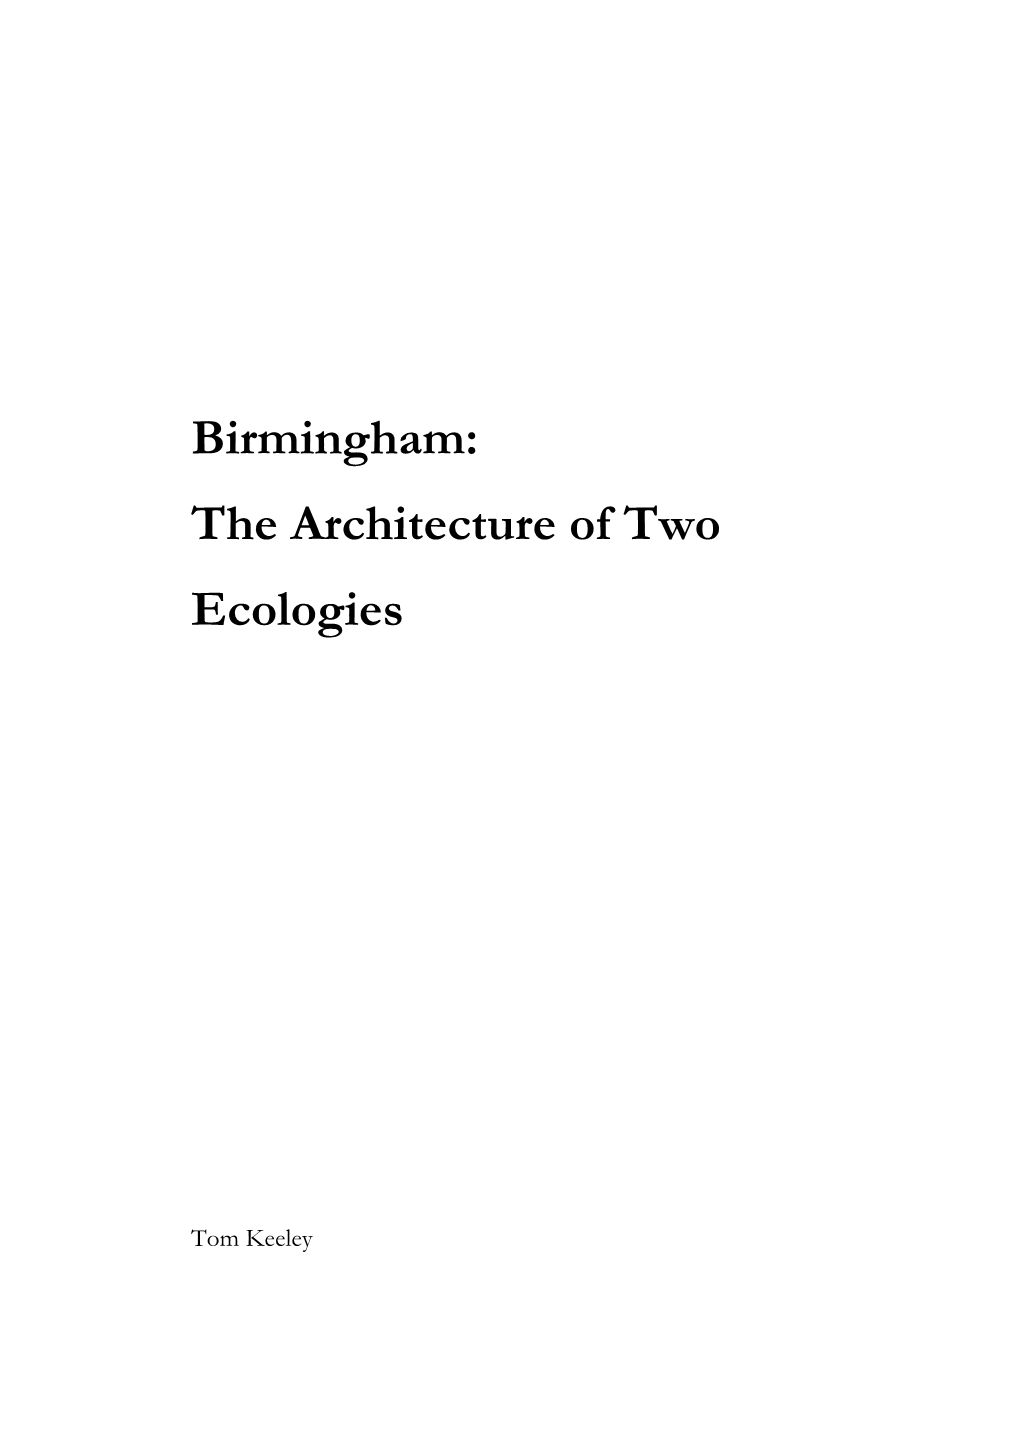 The Architecture of Two Ecologies